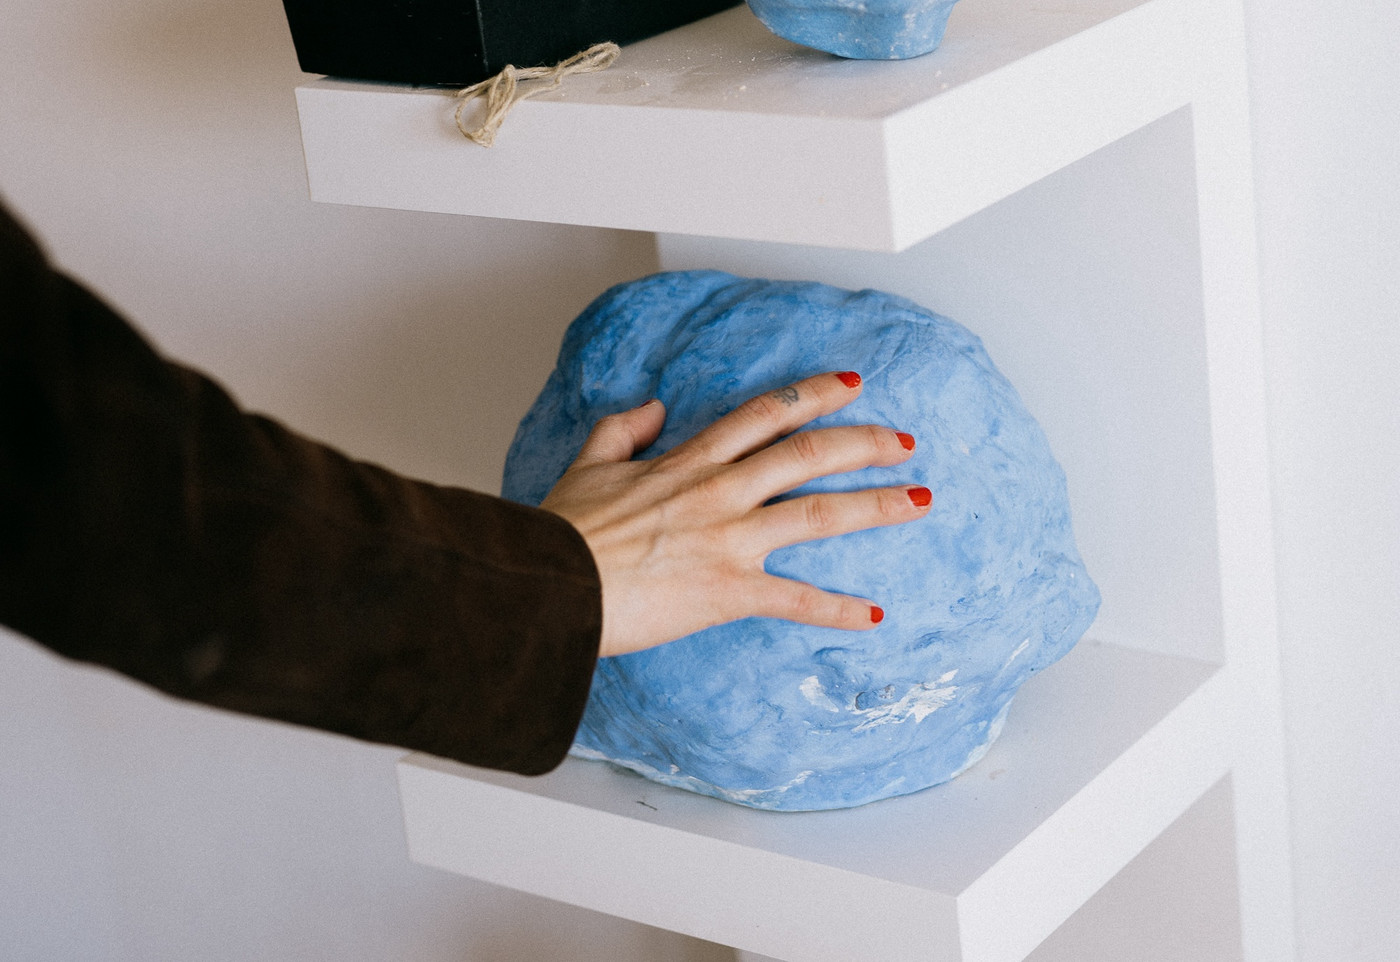 Photo showing a hand with red nailpolish touching a blue, round, sculpture made by artist Kachun Lay.